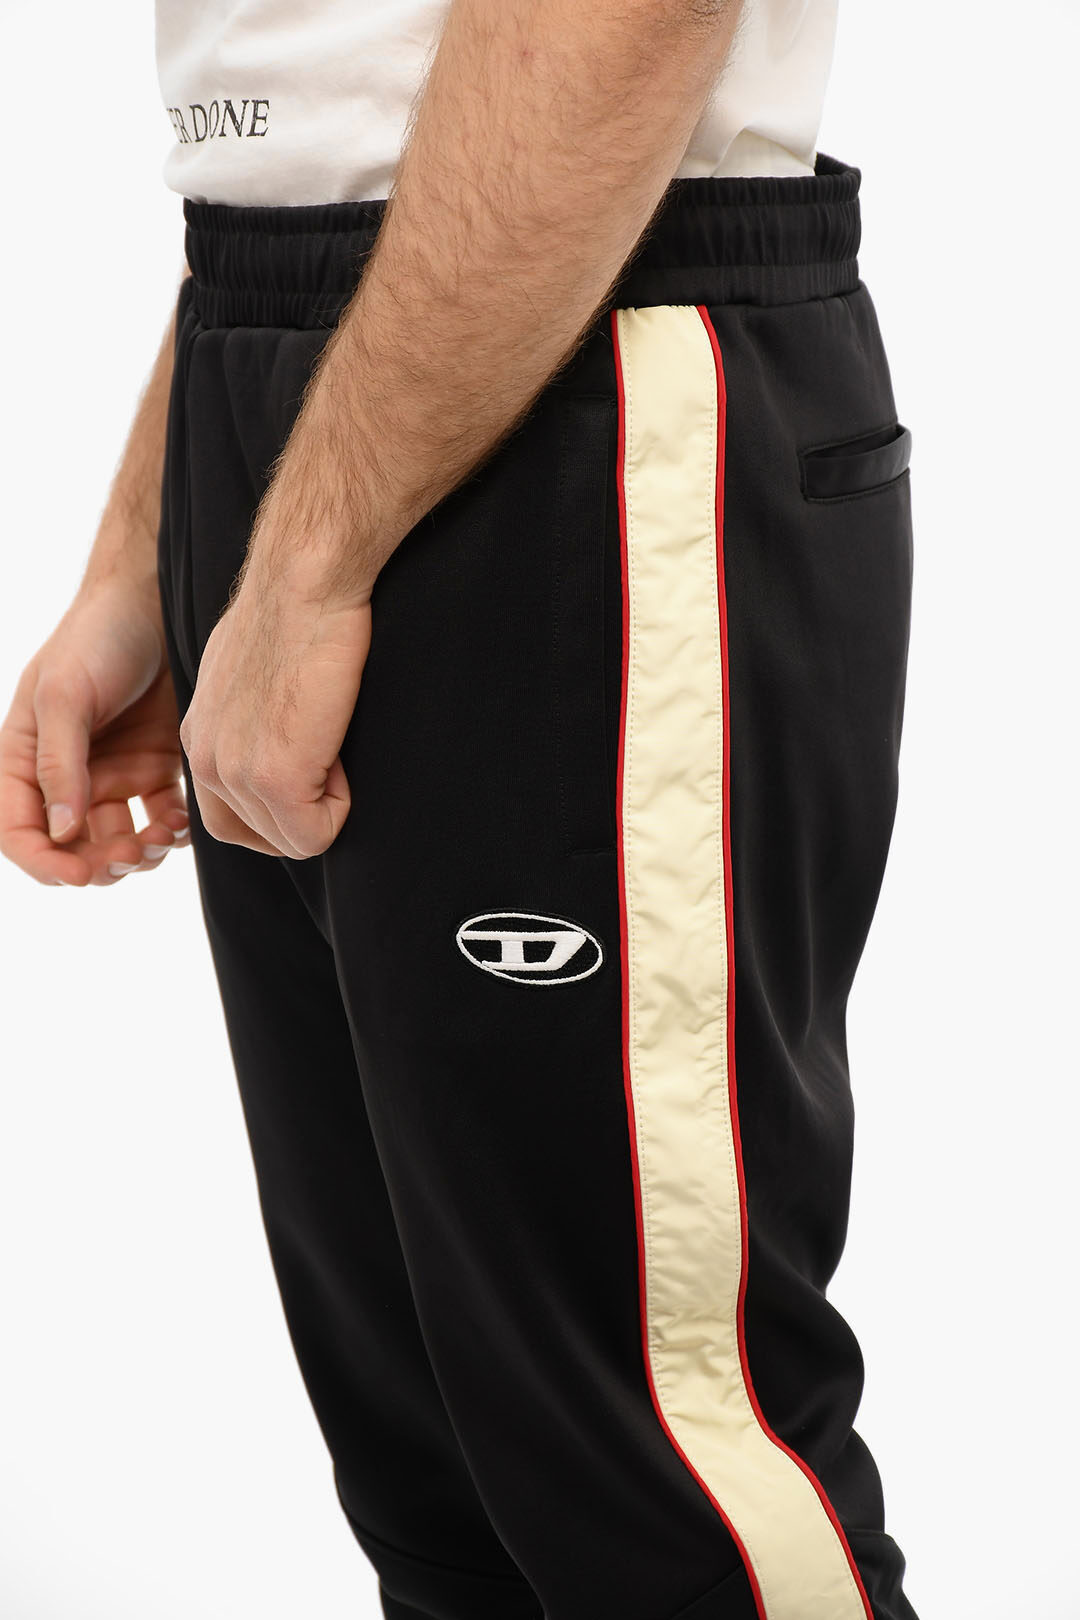 social Rouse Prædiken Diesel Jersey P-BLOCK Joggers with Contrasting Bands men - Glamood Outlet